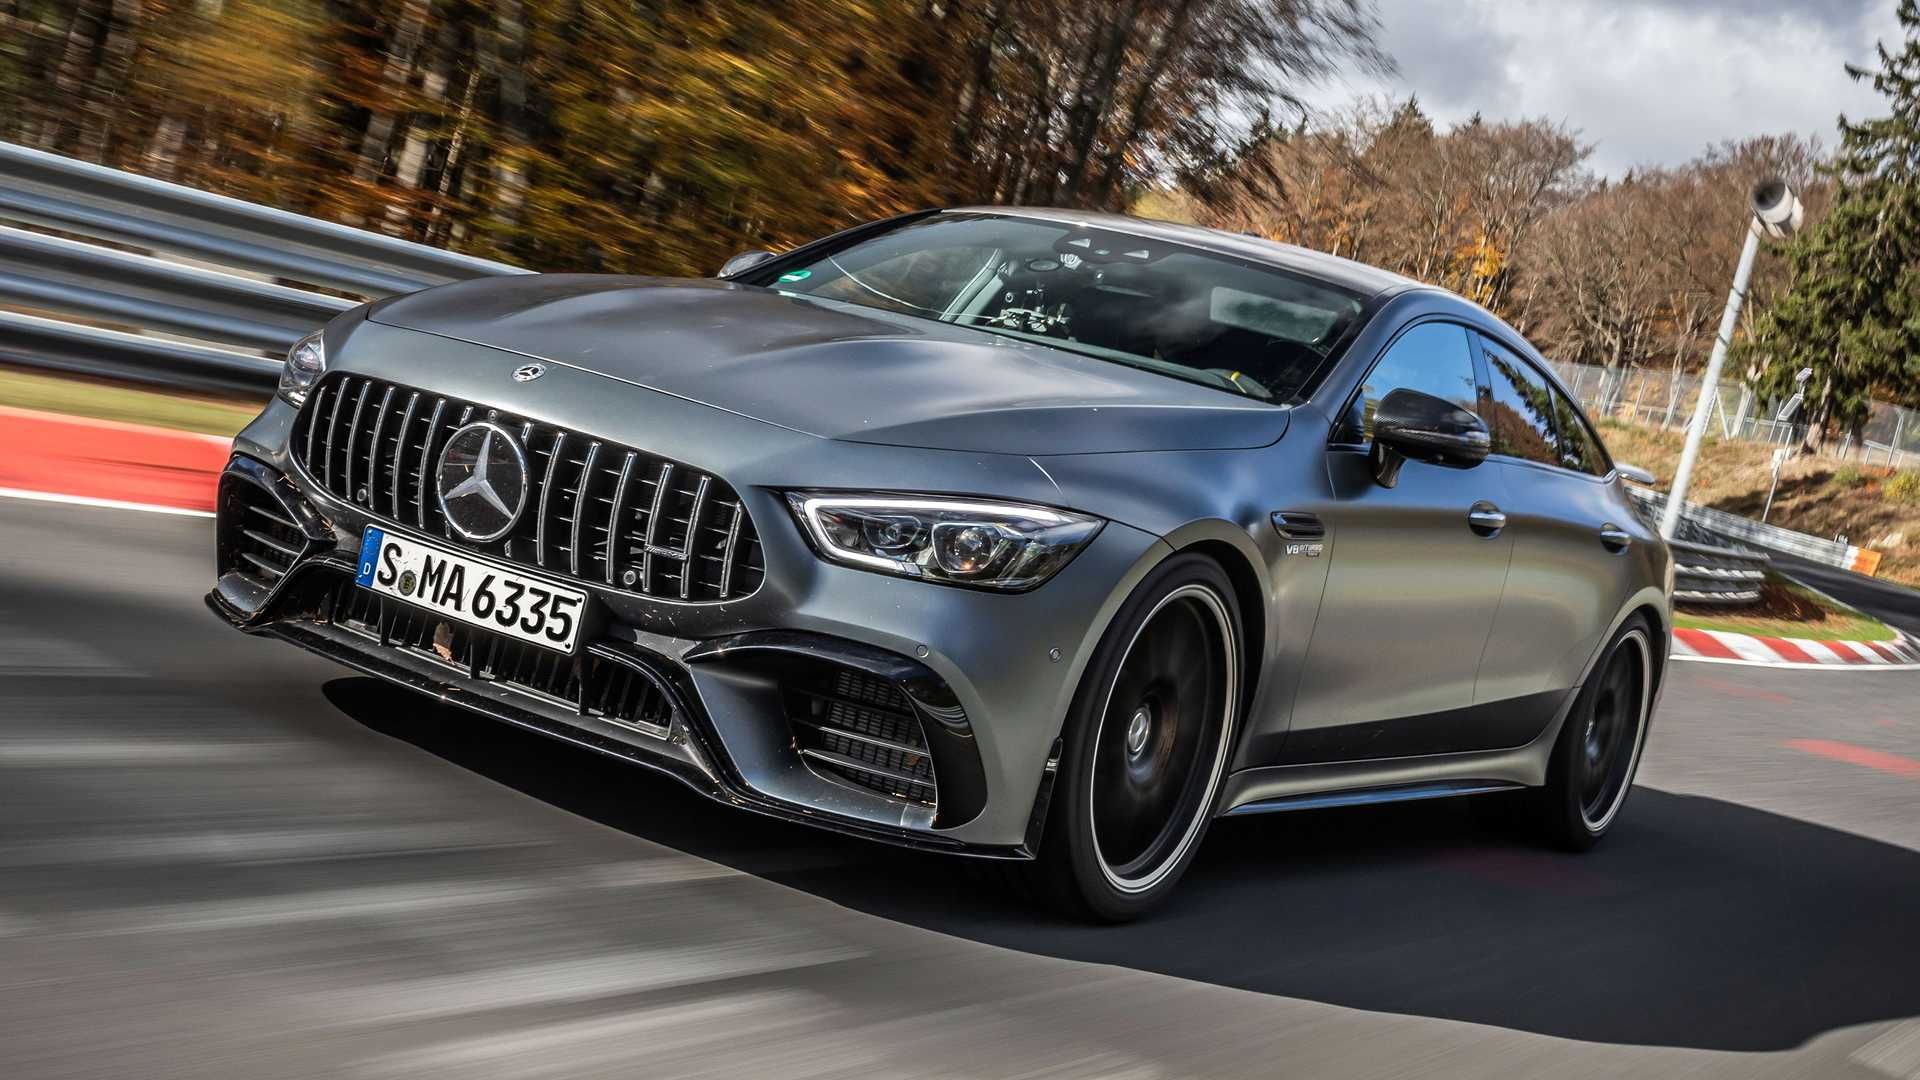 Mercedes AMG GT63s Nurburgring nordeschleife lap record front end